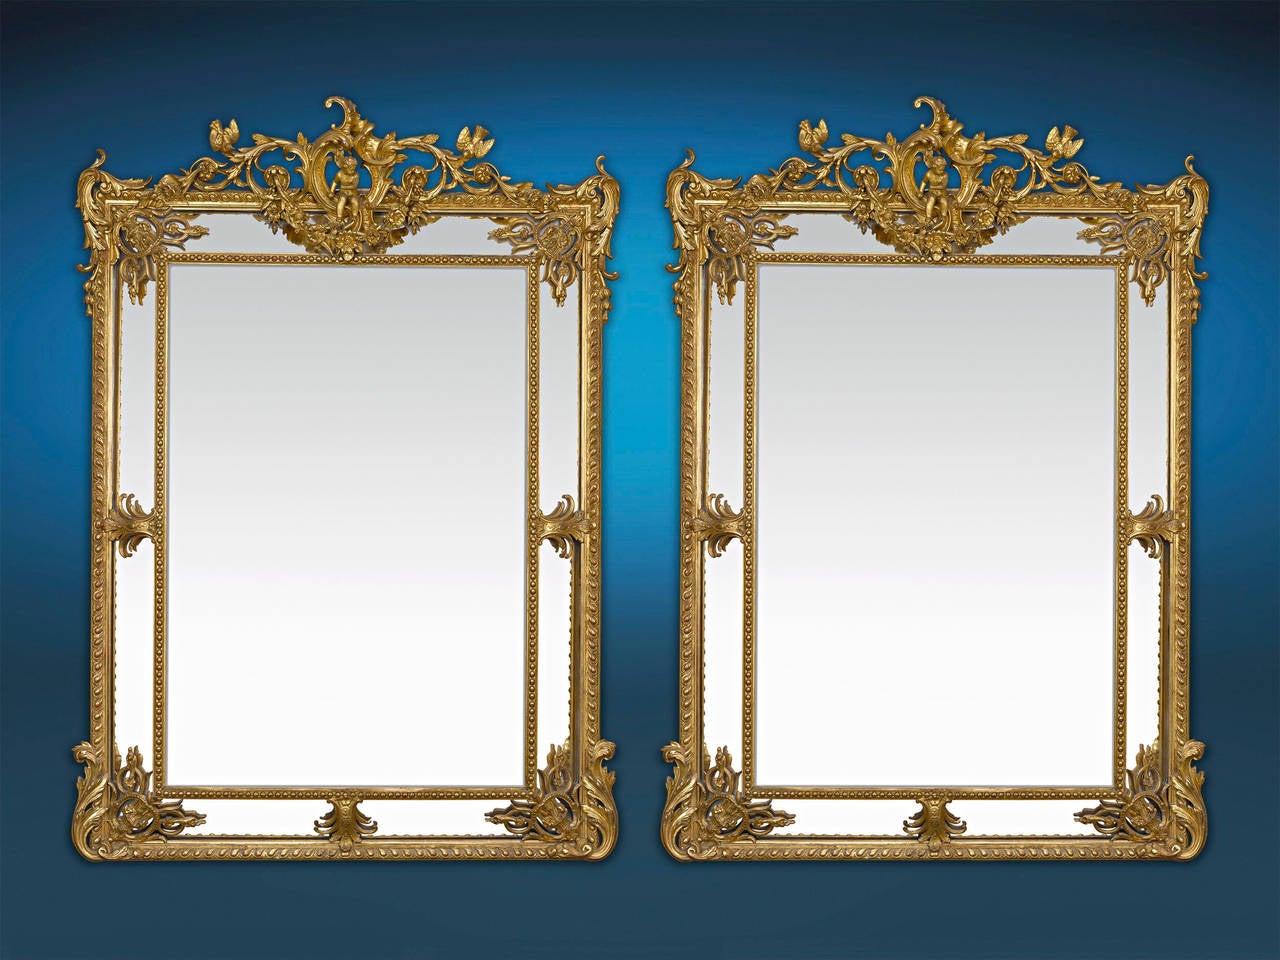 This phenomenal pair of Louis XV-style French mirrors feature elegant, intricately carved giltwood frames. These mirrors are a study in Rococo glamour, with its asymmetrical, foliate decoration, C-scrolls and cherub and bird accents. Highly unique